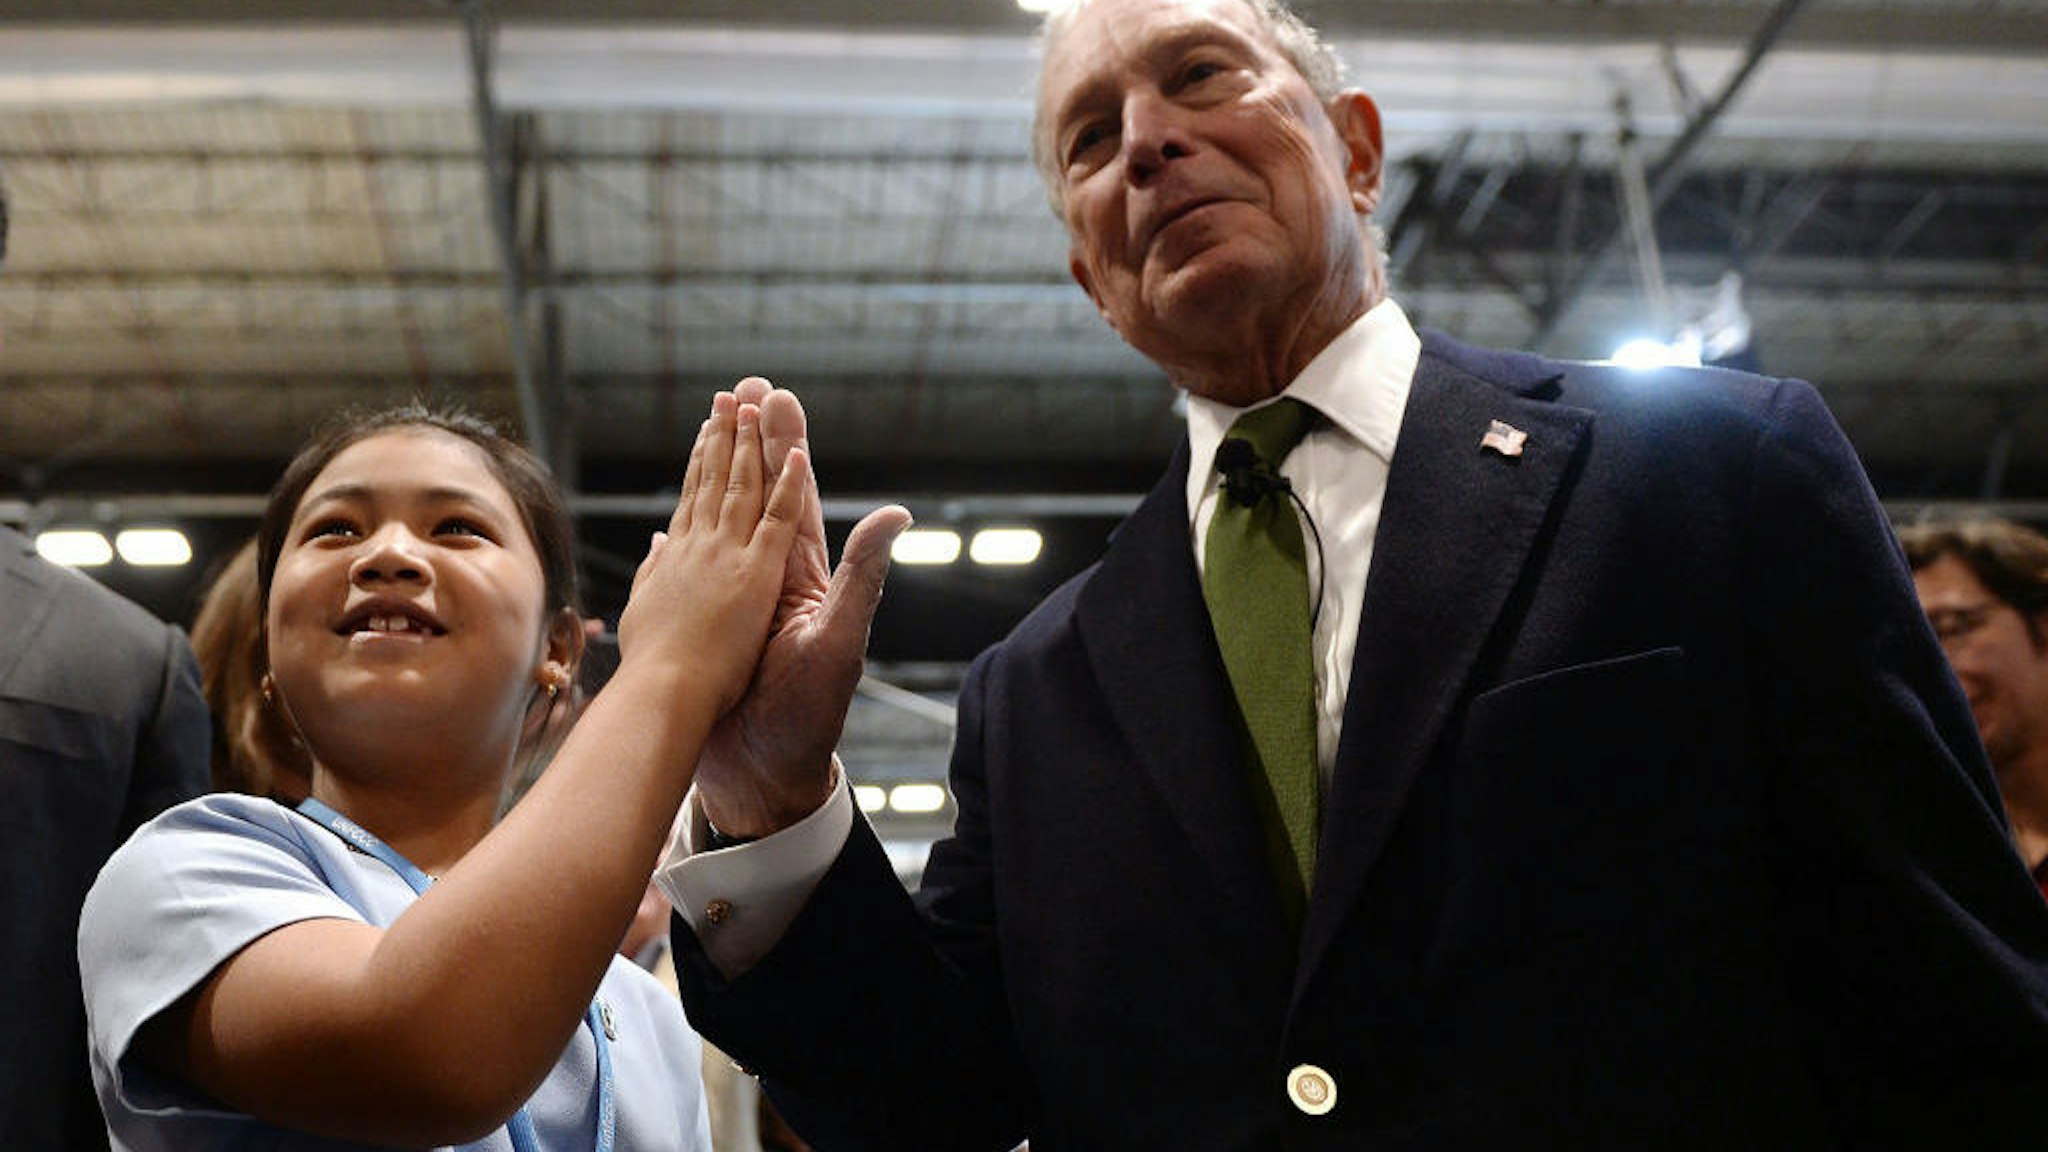 Child environmental activist from India, Licypriya Kangujam (L) and Democratic presidential hopeful Michael Bloomberg slap hands during the UN Climate Change Conference COP25 at the 'IFEMA - Feria de Madrid' exhibition centre, in Madrid, on December 10, 2019. - UN climate negotiations in Madrid remained bogged down yesterday in the fine print of the Paris treaty rulebook, out-of-sync with a world demanding action to forestall the ravages of global warming. The 196-nation talks should kick into high-gear today with the arrival of ministers, but on the most crucial issue of all -- slashing the greenhouse gas emissions overheating the planet -- major emitters have made it clear they have nothing to say. (Photo by CRISTINA QUICLER / AFP)